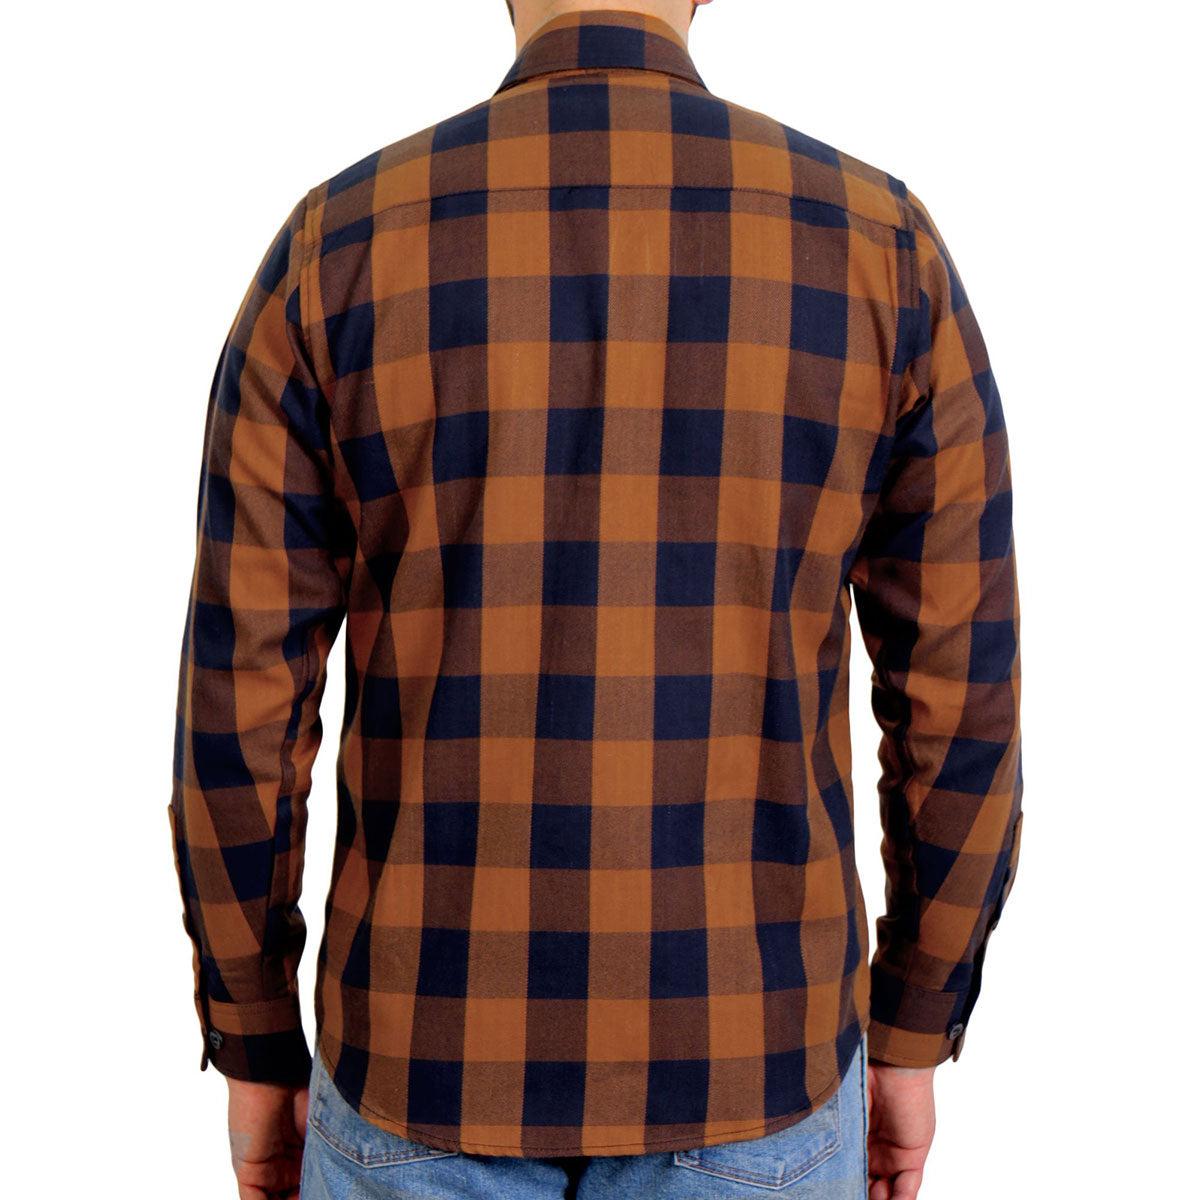 Hot Leathers FLM2016 Men's Brown and Navy-Blue Long Sleeve Flannel Shirt